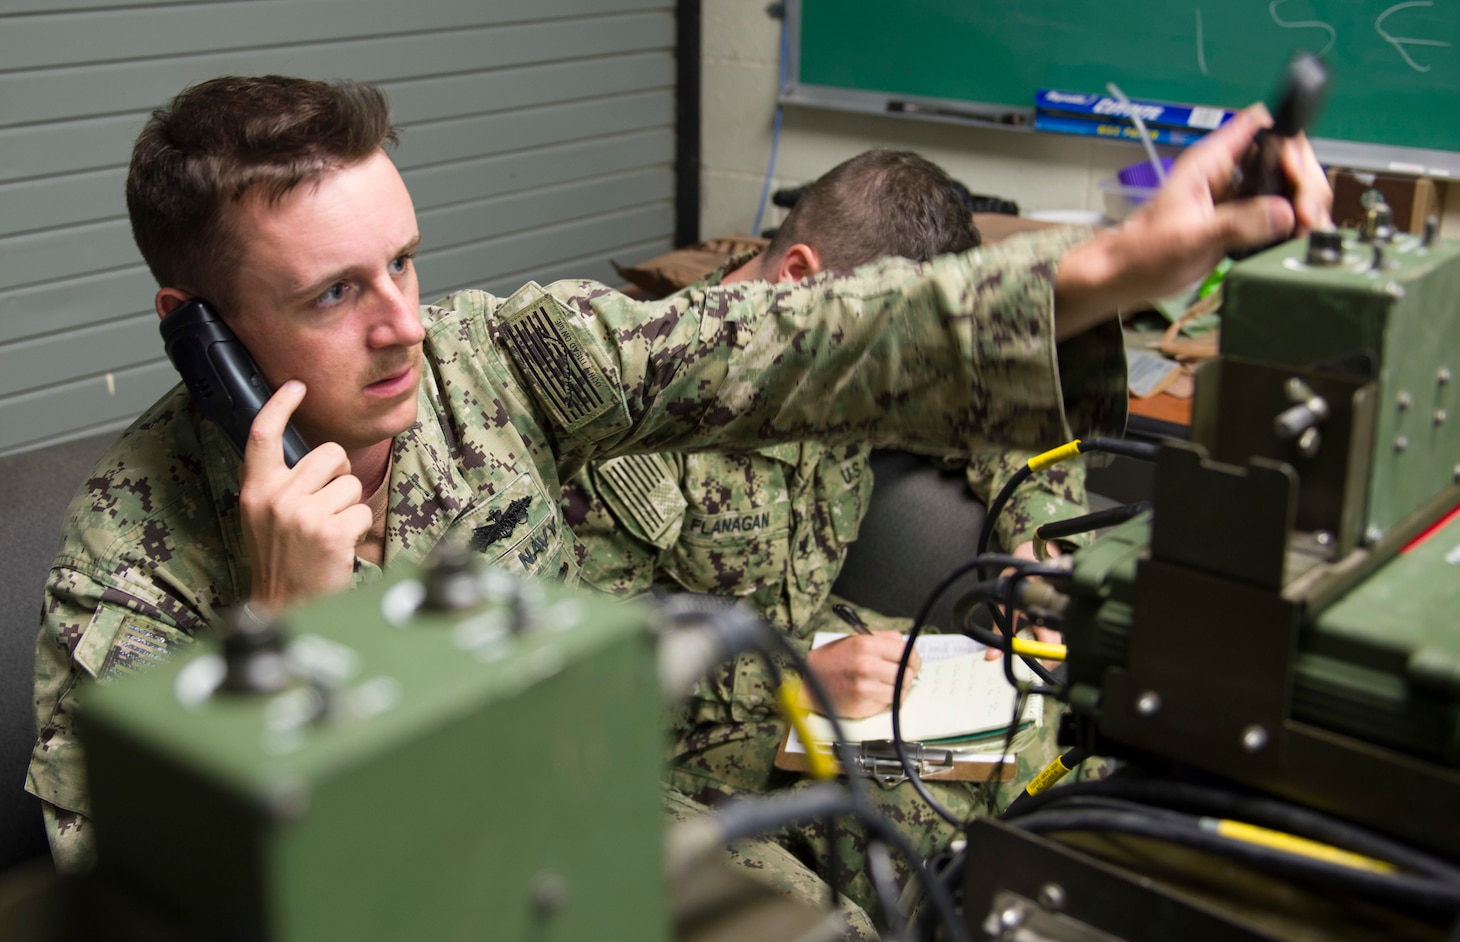 Electronics Technician 2nd Class Anthony Juarez and Electronics Technician 3rd Class Codie Flanagan, assigned to Naval Mobile Construction Battalion (NMCB)1,  adjust frequency codes on a GRC-234 high-frequency base station at Naval Base Guam July 27, 2017. These tests give NMCB 1 Sailors the opportunity to perform quality assurance checks on their system’s maximum range and communication quality with Port Hueneme, Calif. NMCB 1 provides expeditionary construction and engineering support to expeditionary bases and responds to humanitarian assistance disaster relief requests.